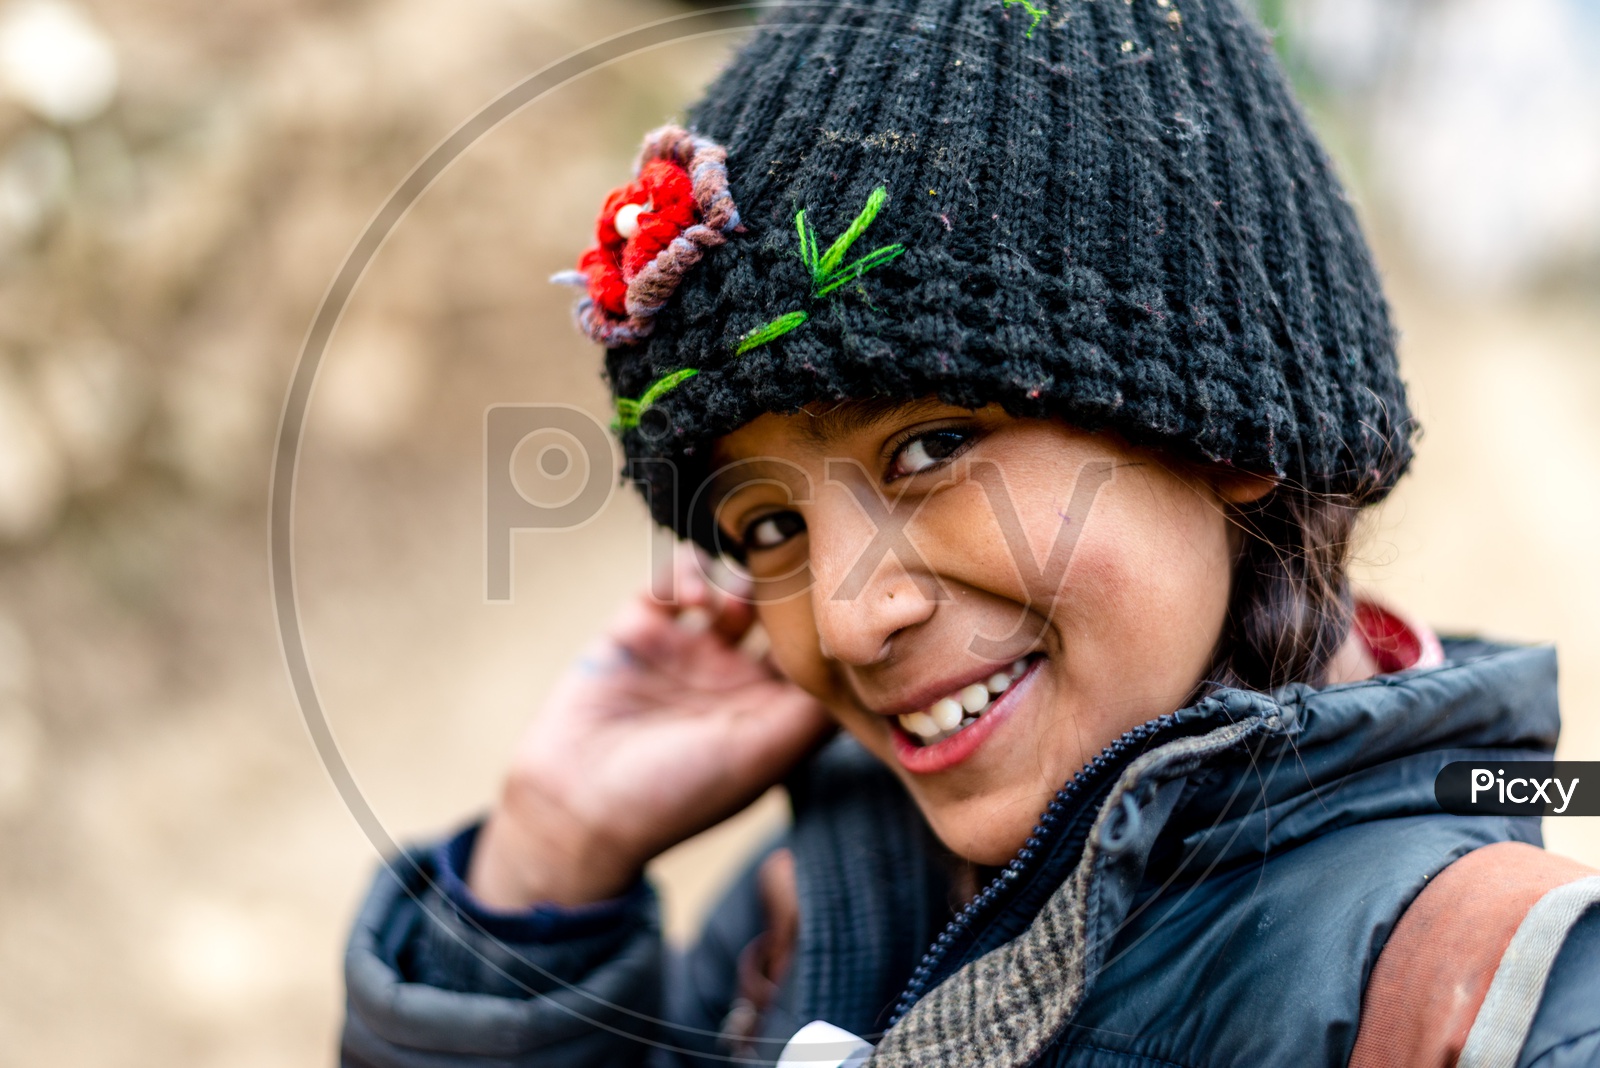 Cute Smile of a Himachali Girl on the Street